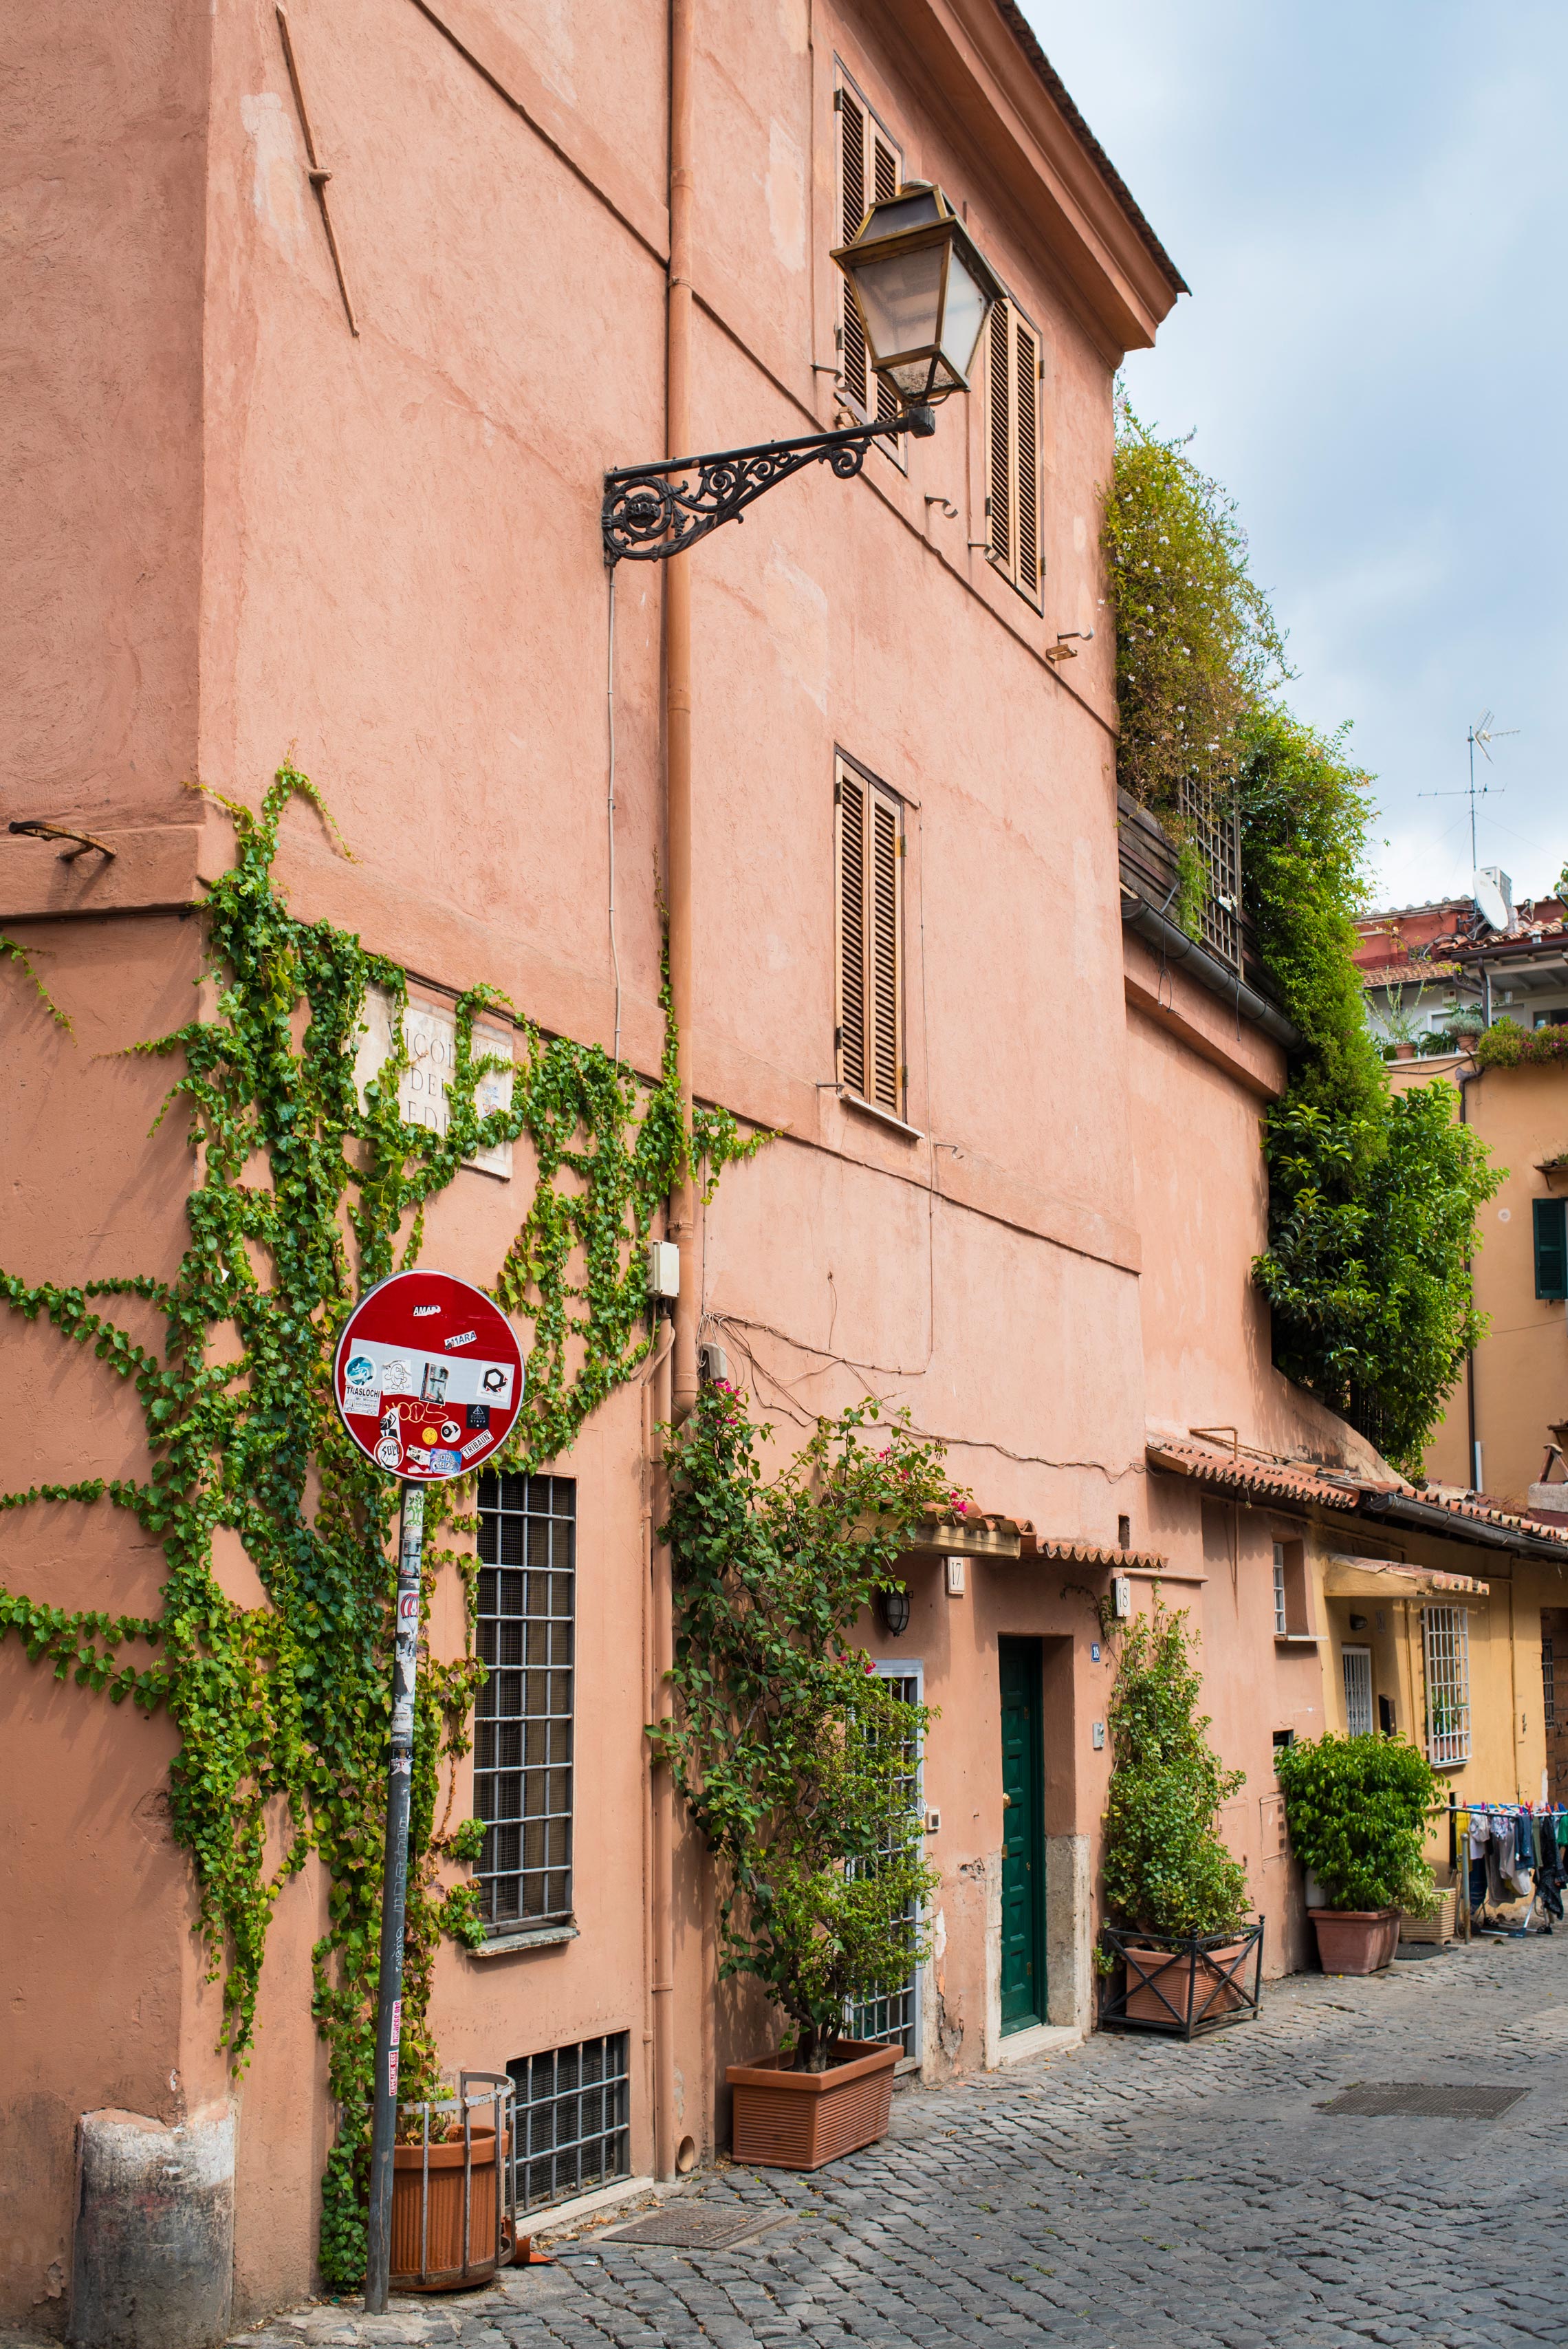 The Best Free Things to do in Rome, Trastevere